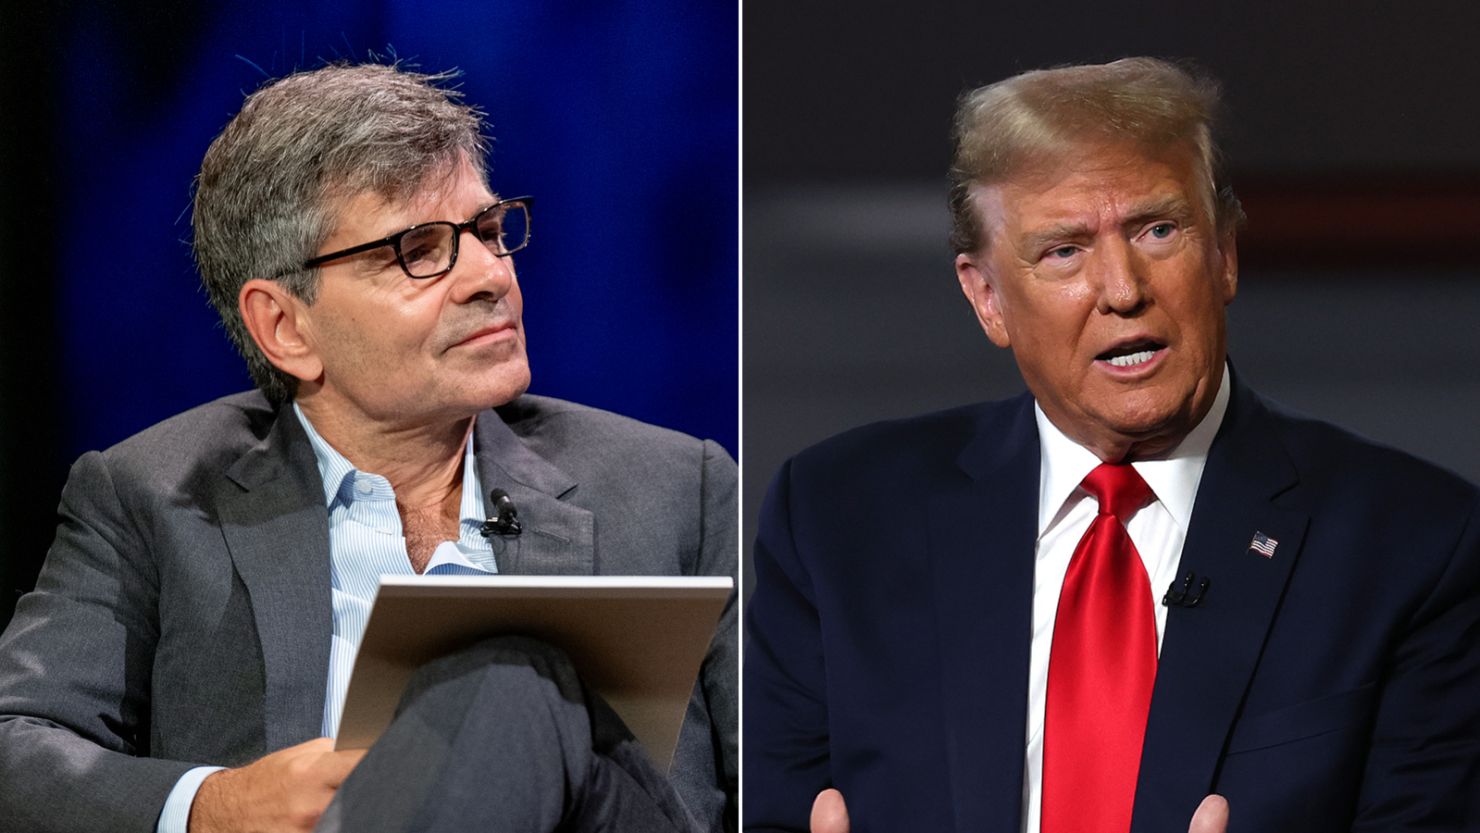 George Stephanopoulos (L) and Donald Trump (R).